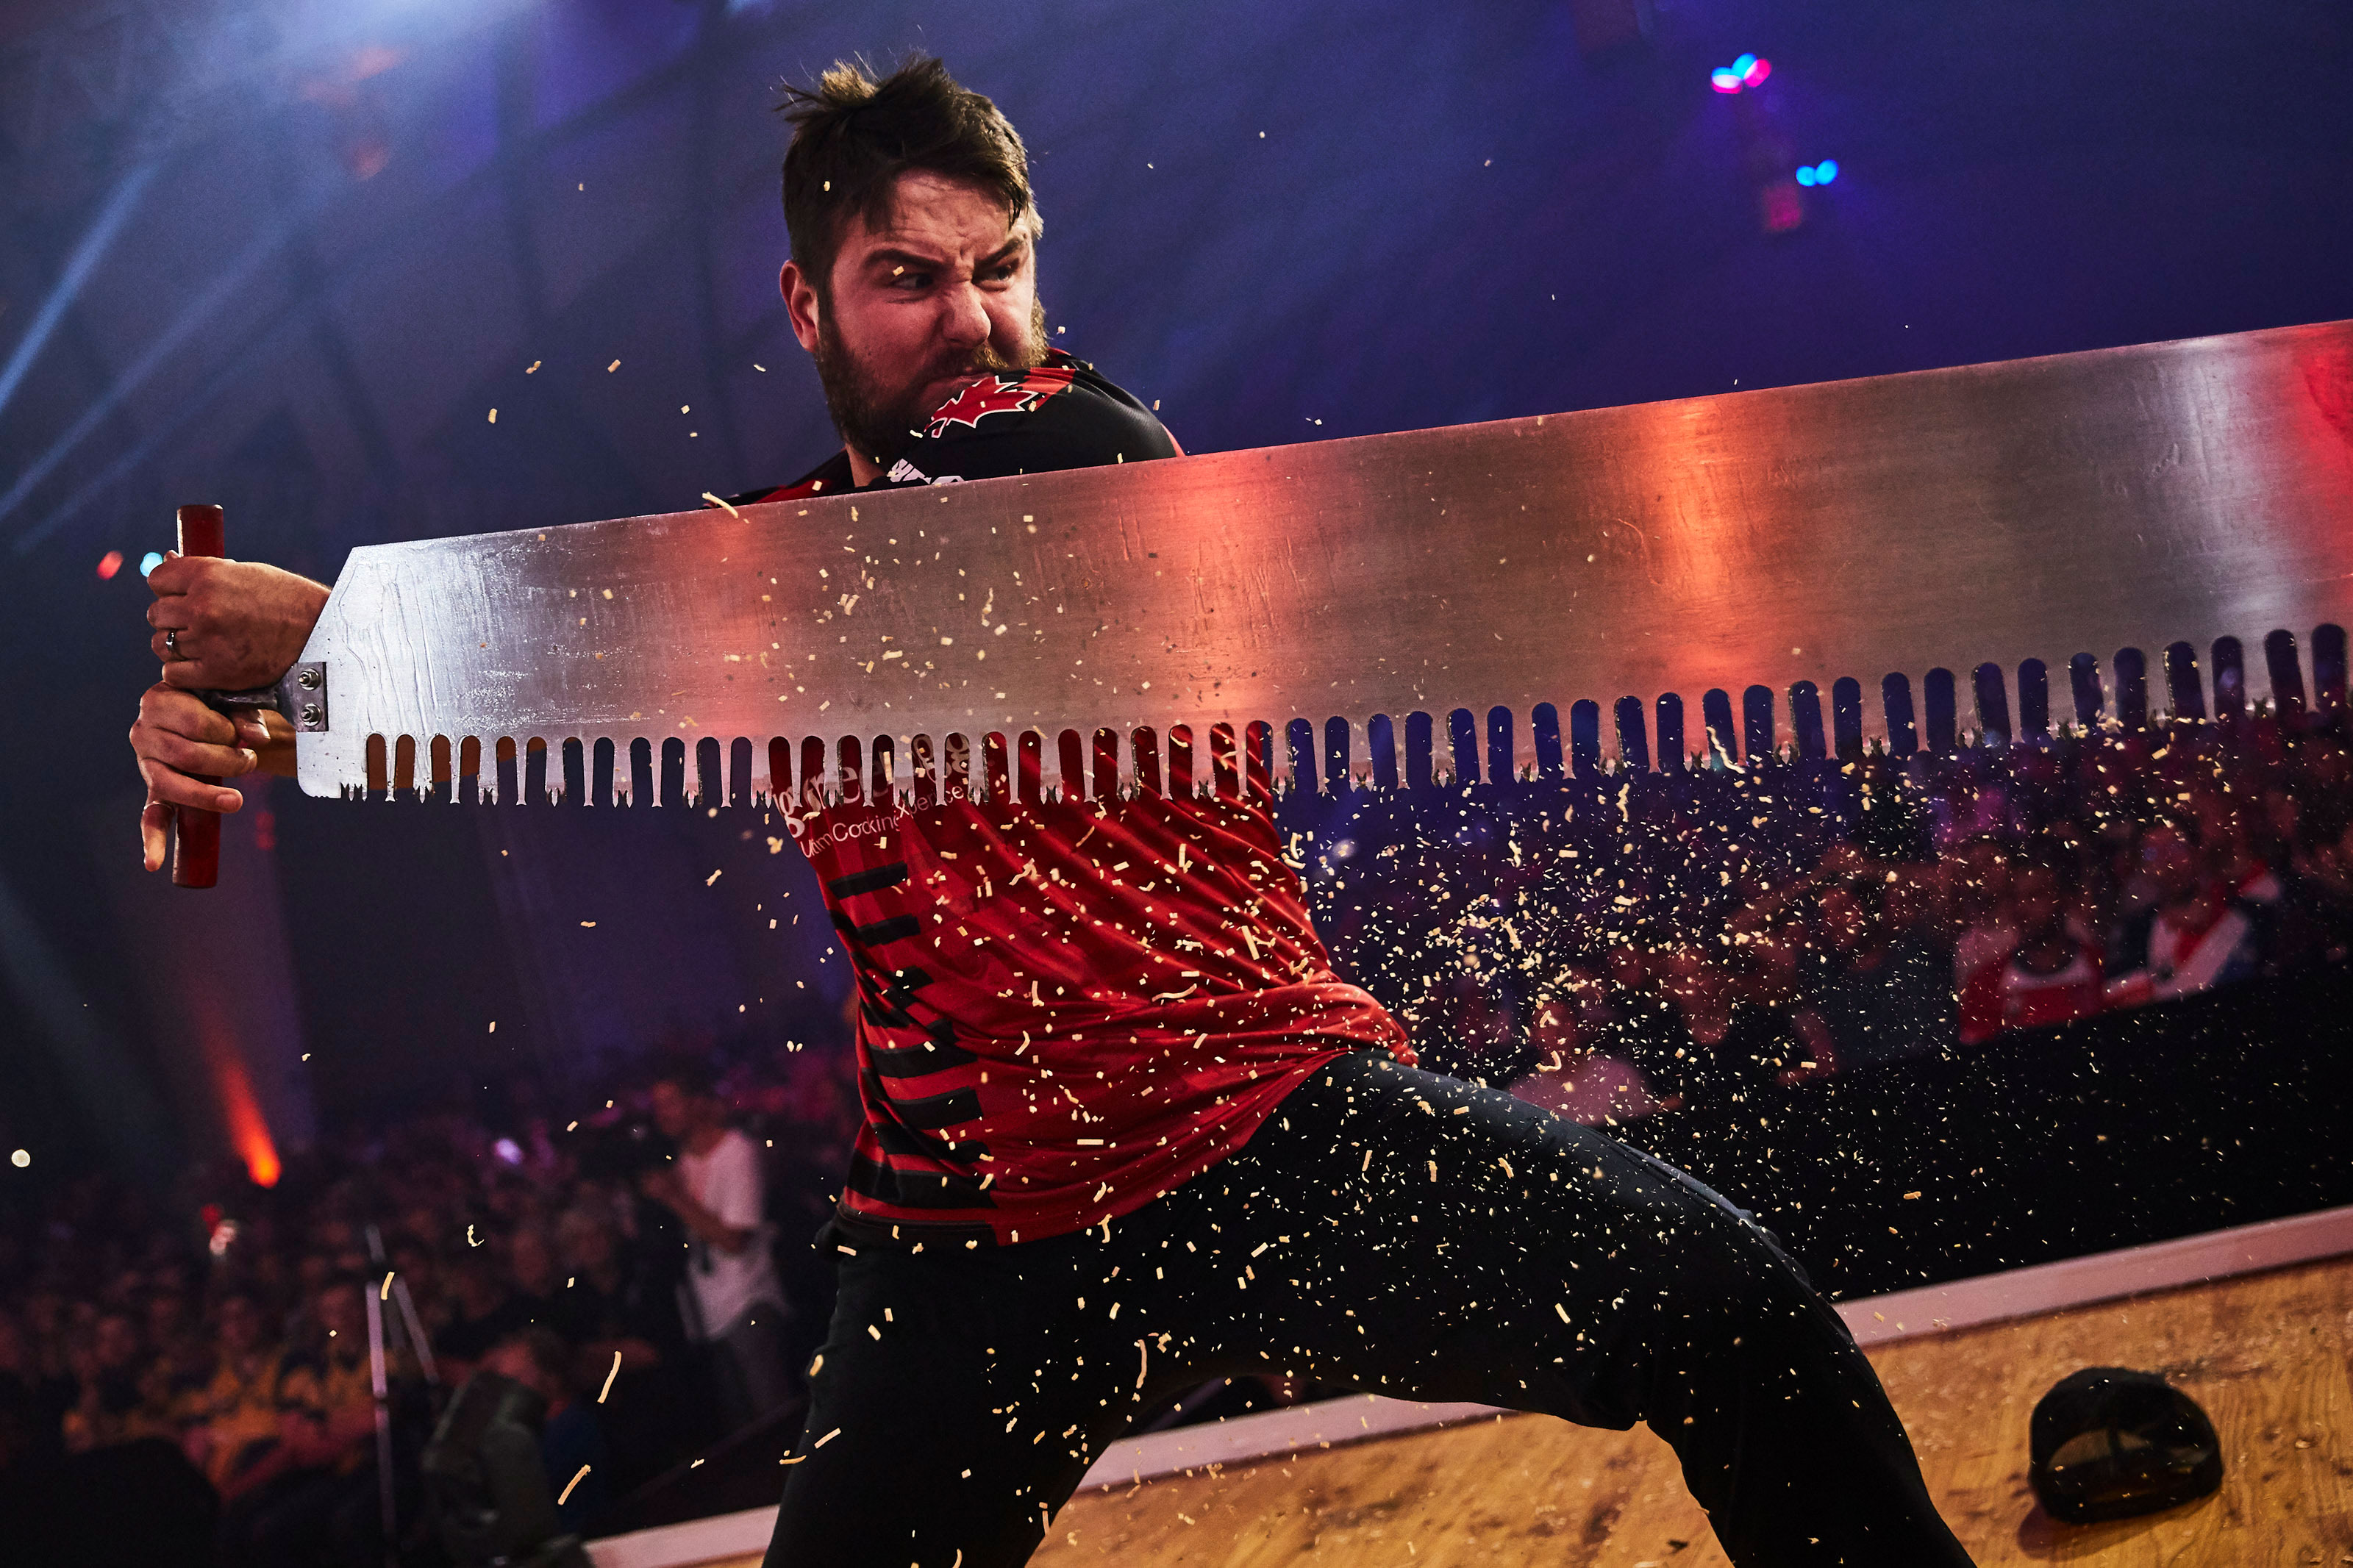 STIHL TIMBERSPORTS® athlete Ben Cumberland from Canada at the 2019 Individual World Championship in Prague during the Single Buck 